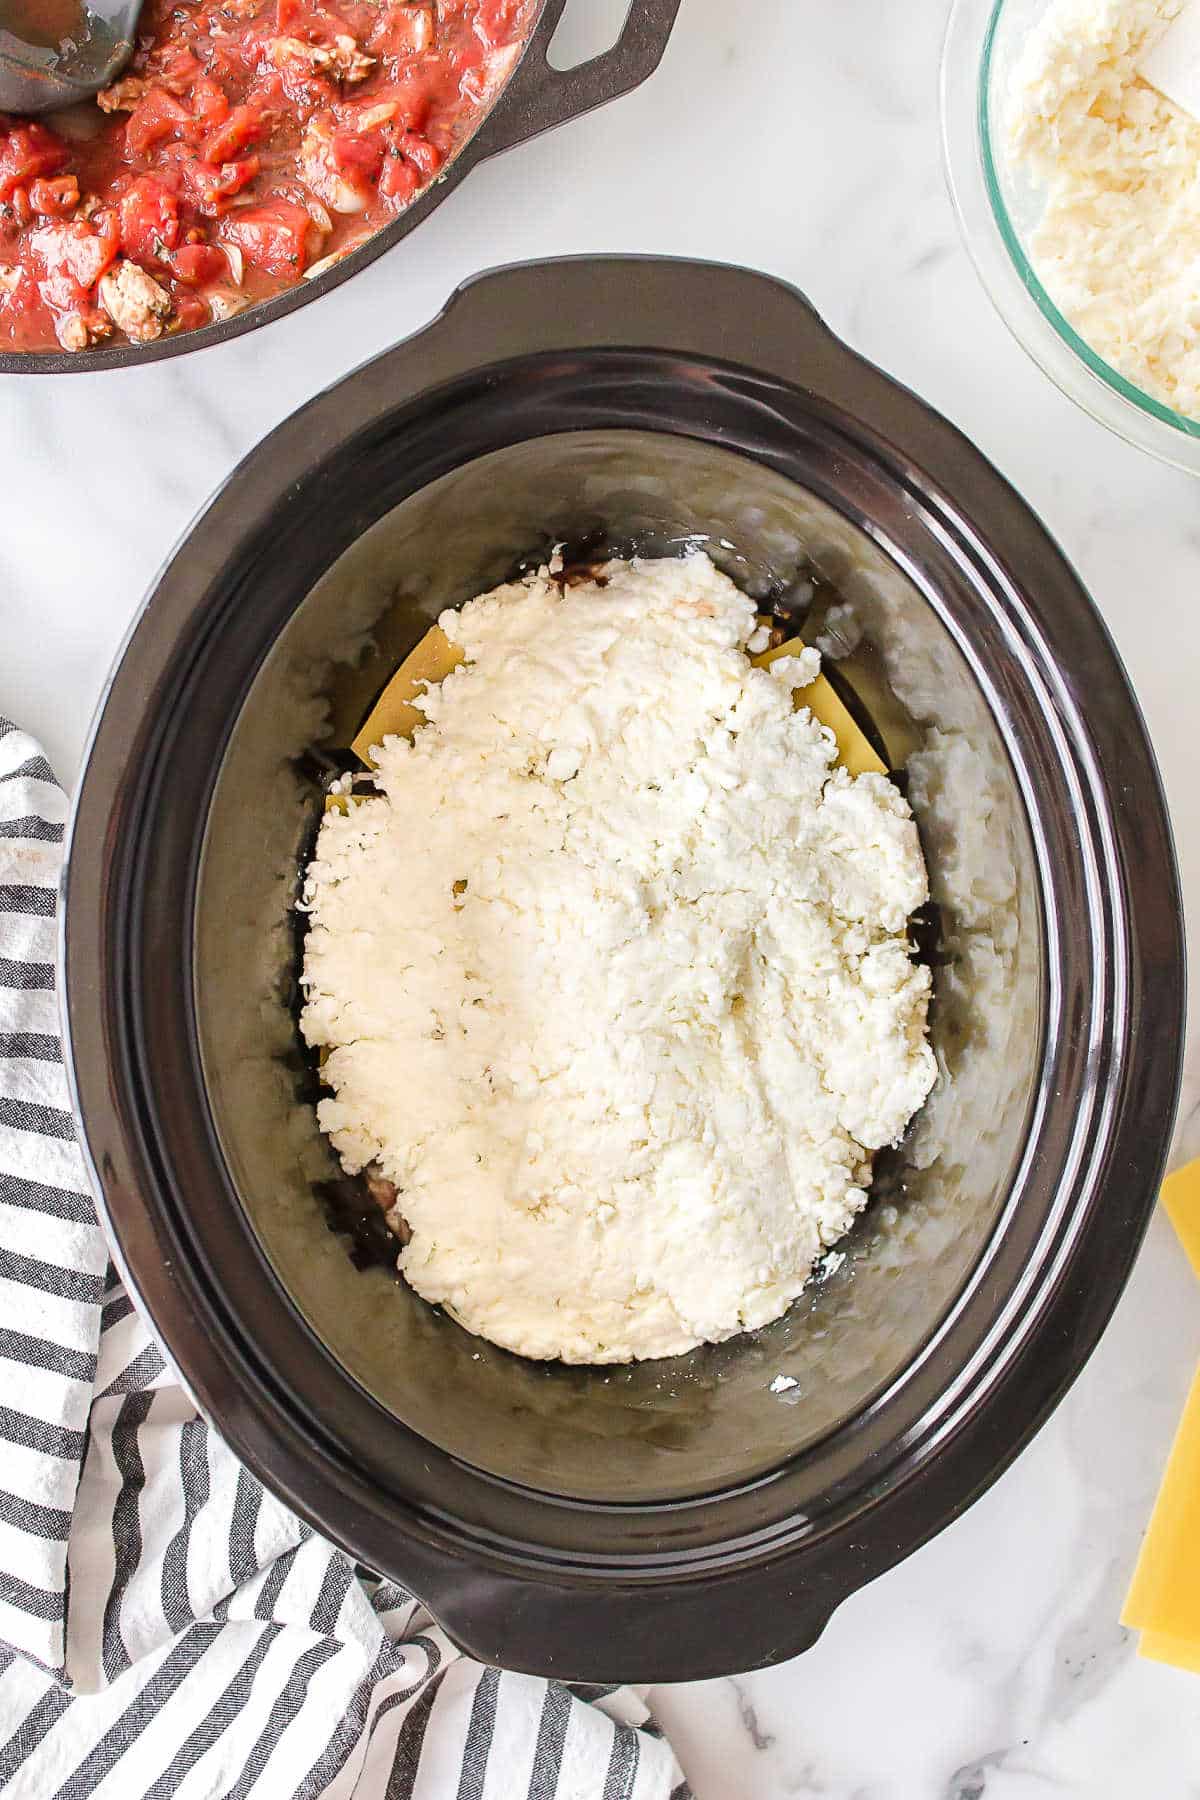 Cheese mixture on noodles in a slow cooker. 